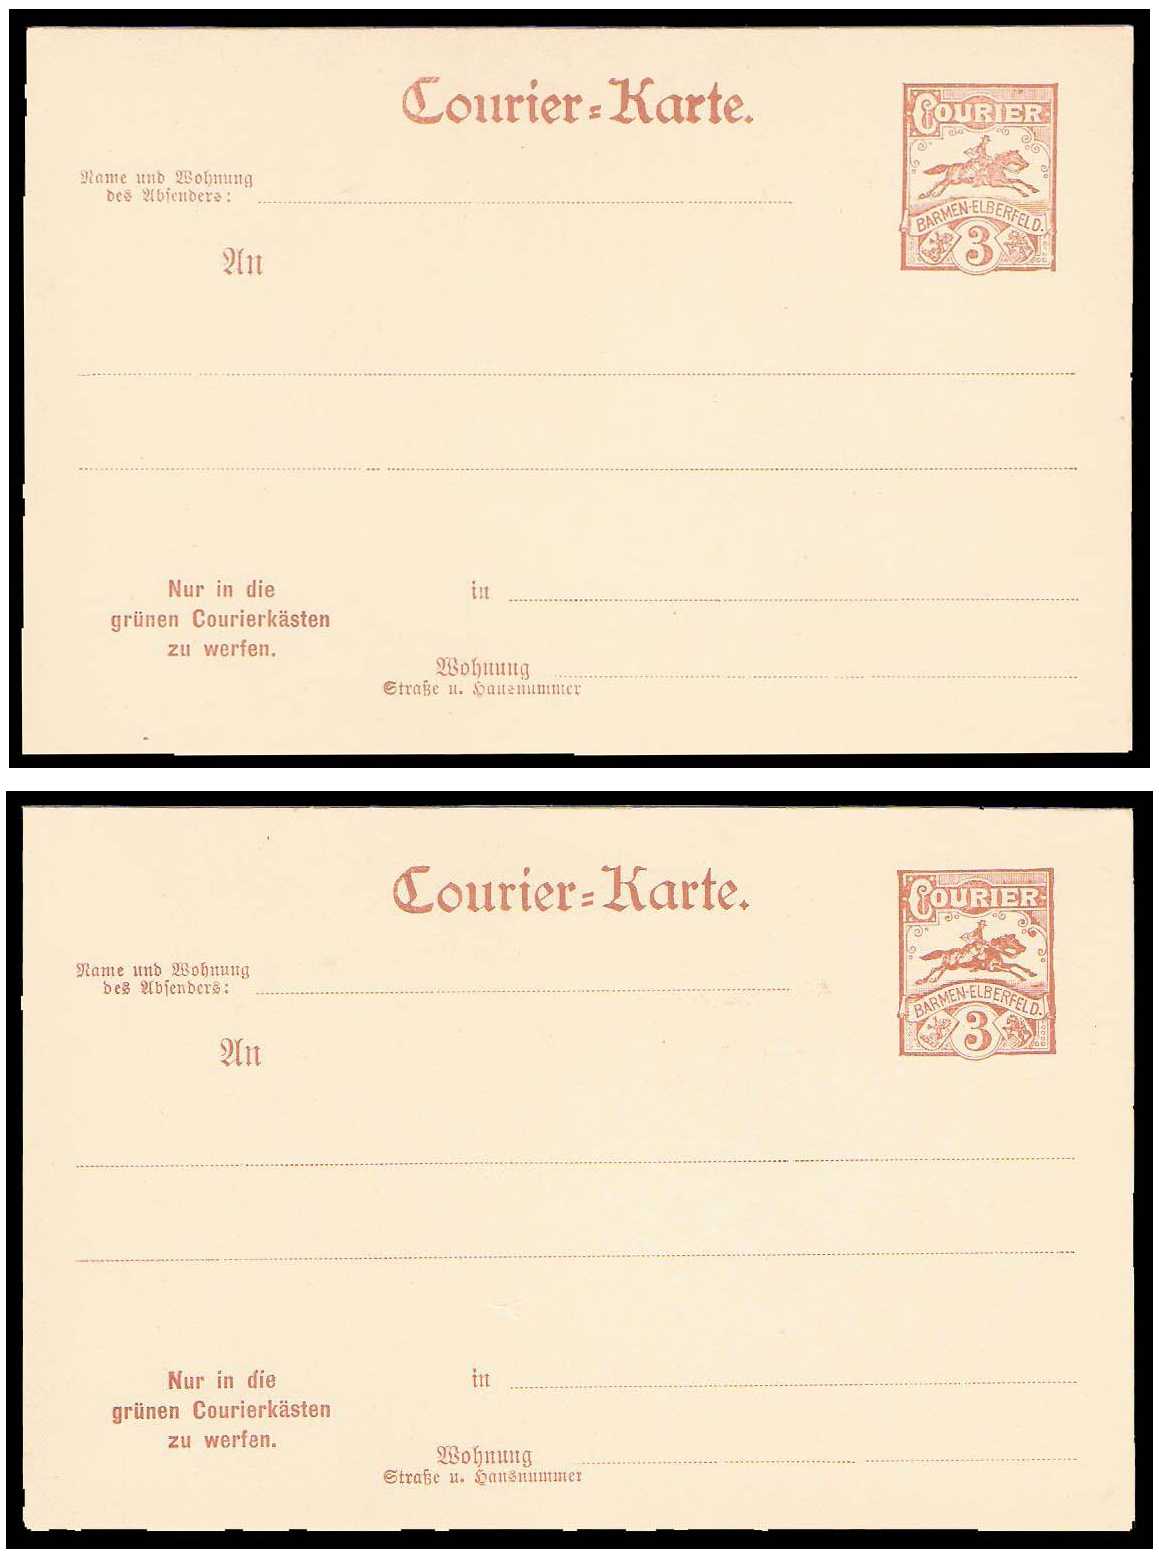 1899 Germany Private Mail Wuppertal - Barmen-Elberfeld Mü C P7 collection 01